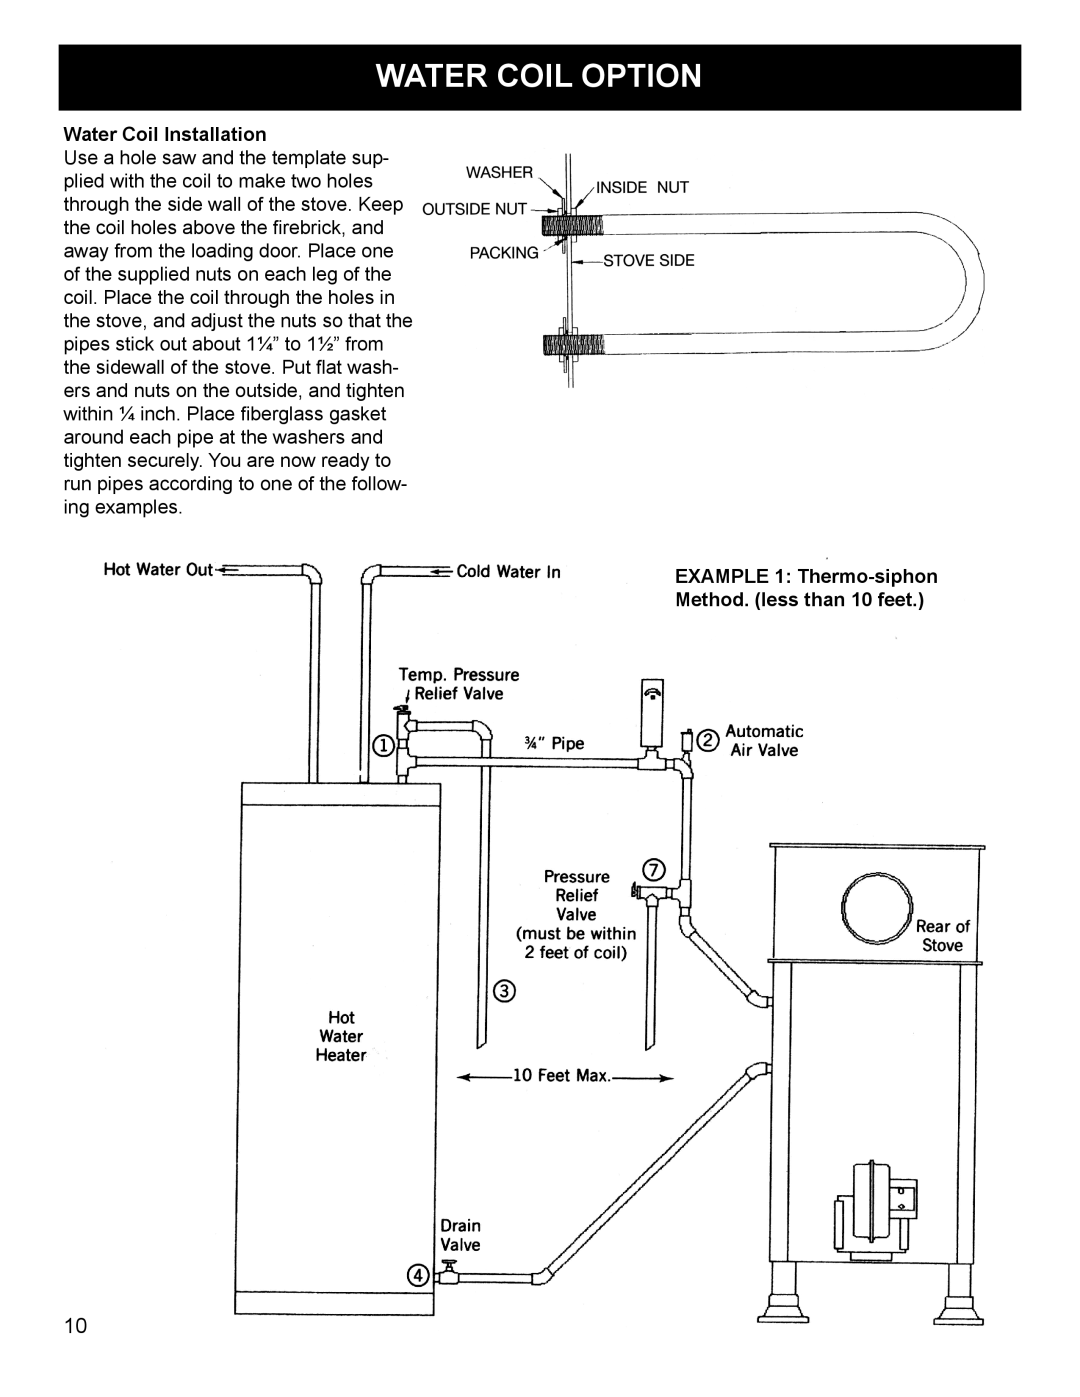 Harman Stove Company SF 250 Water coil option, Water Coil Installation, Example 1 Thermo-siphon Method. less than 10 feet 